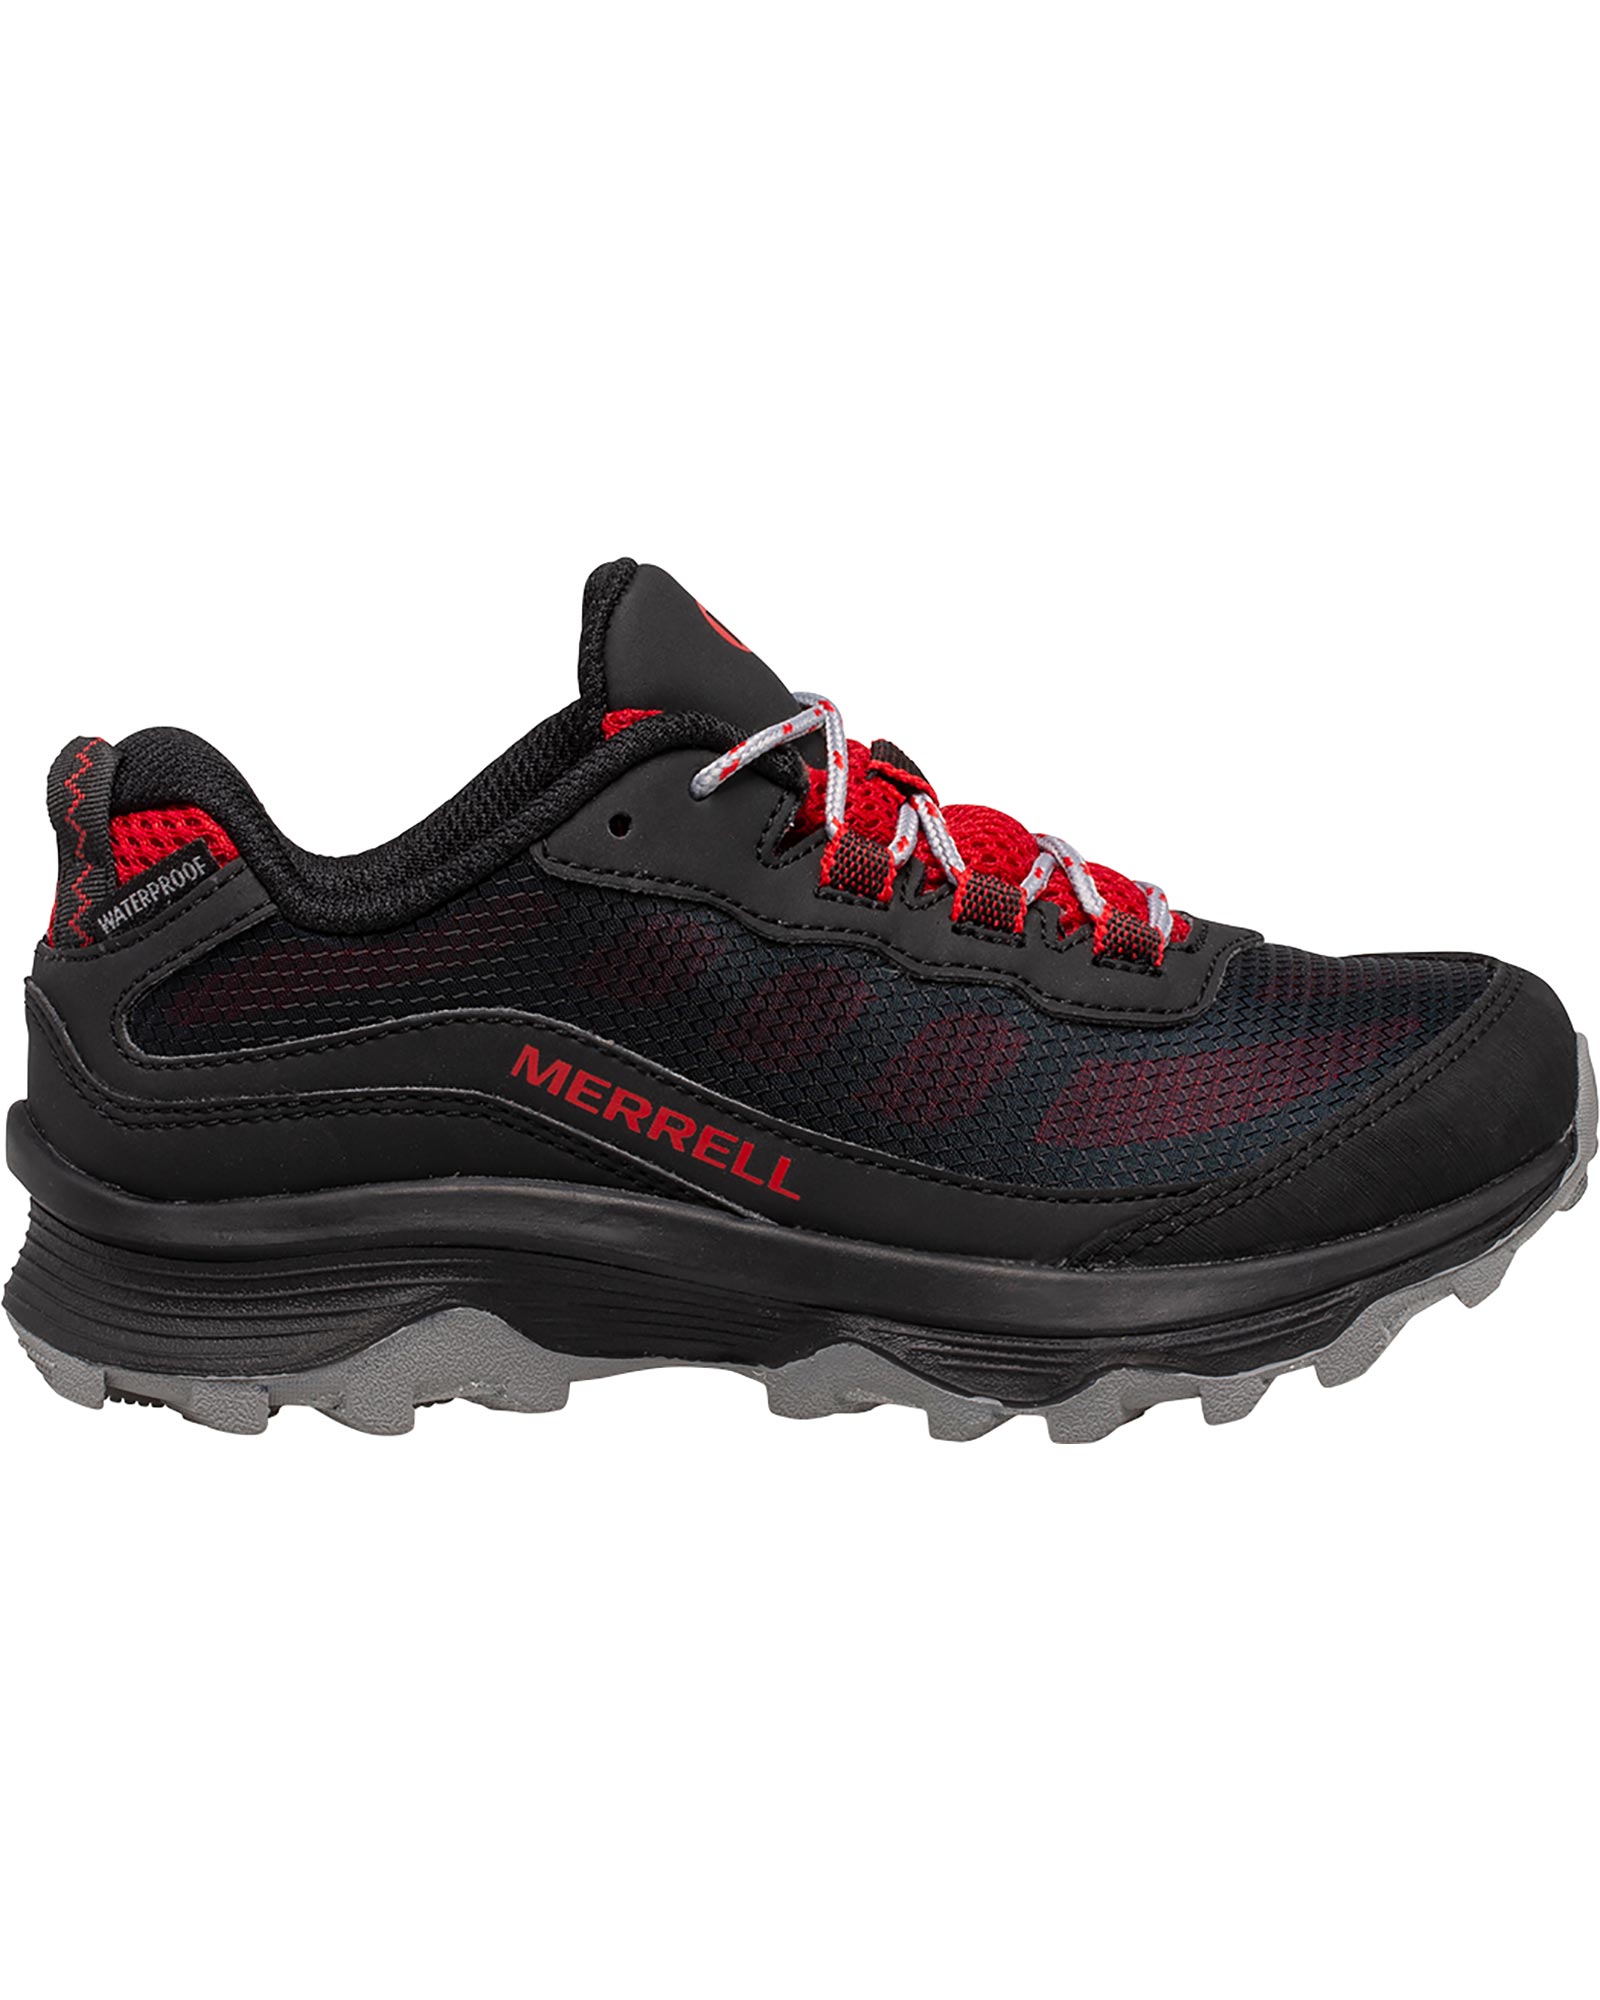 Merrell Moab Speed Laces Kids’ Waterproof Shoes - Grey/Black/Red UK 3